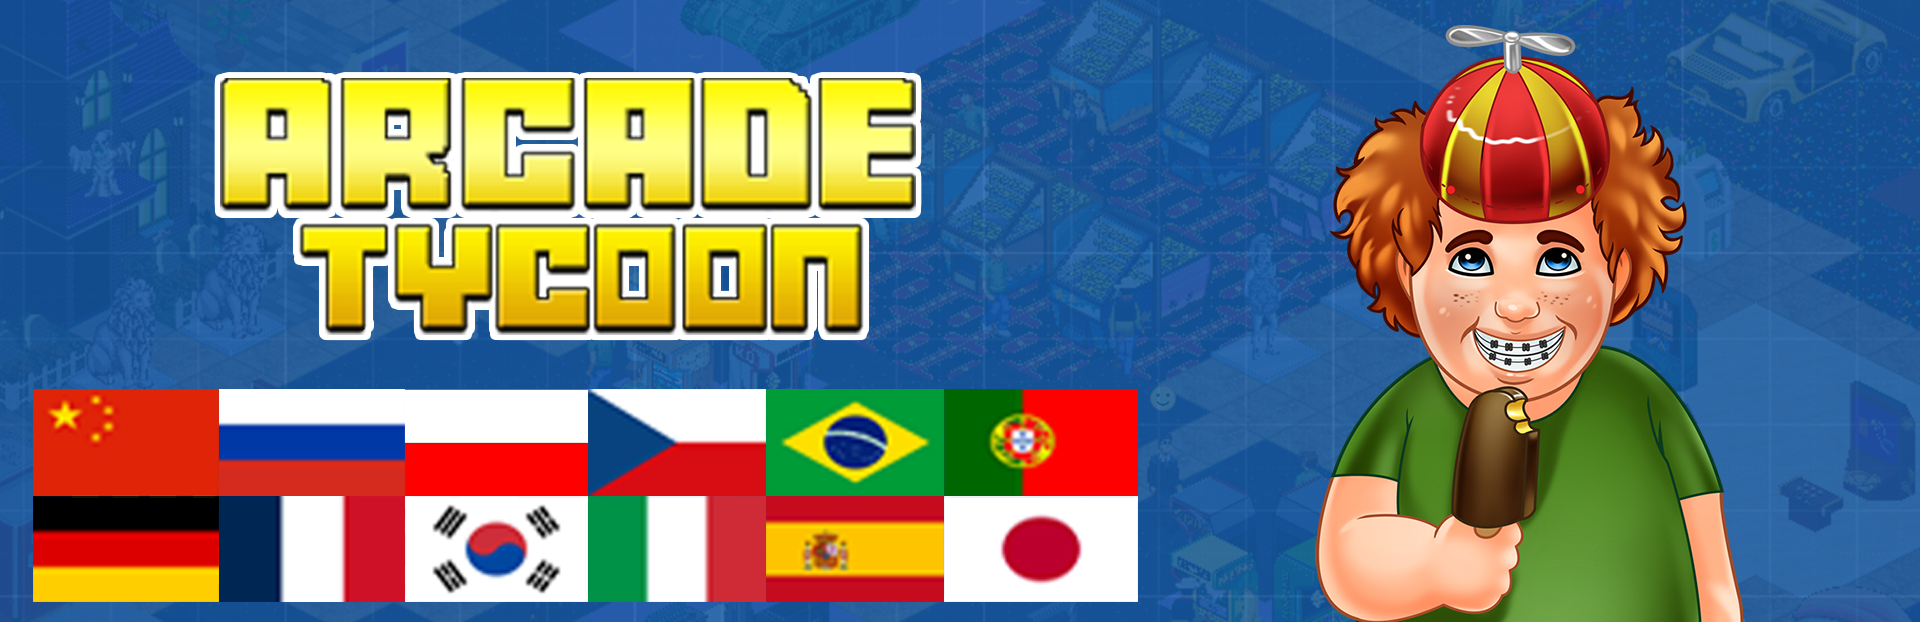 Arcade Tycoon Update For 17 April 2020 Localisation Queue System Updated How To Play Bug Fixes Steamdb - floor expansion vending machines and npcs in roblox arcade tycoon update 031